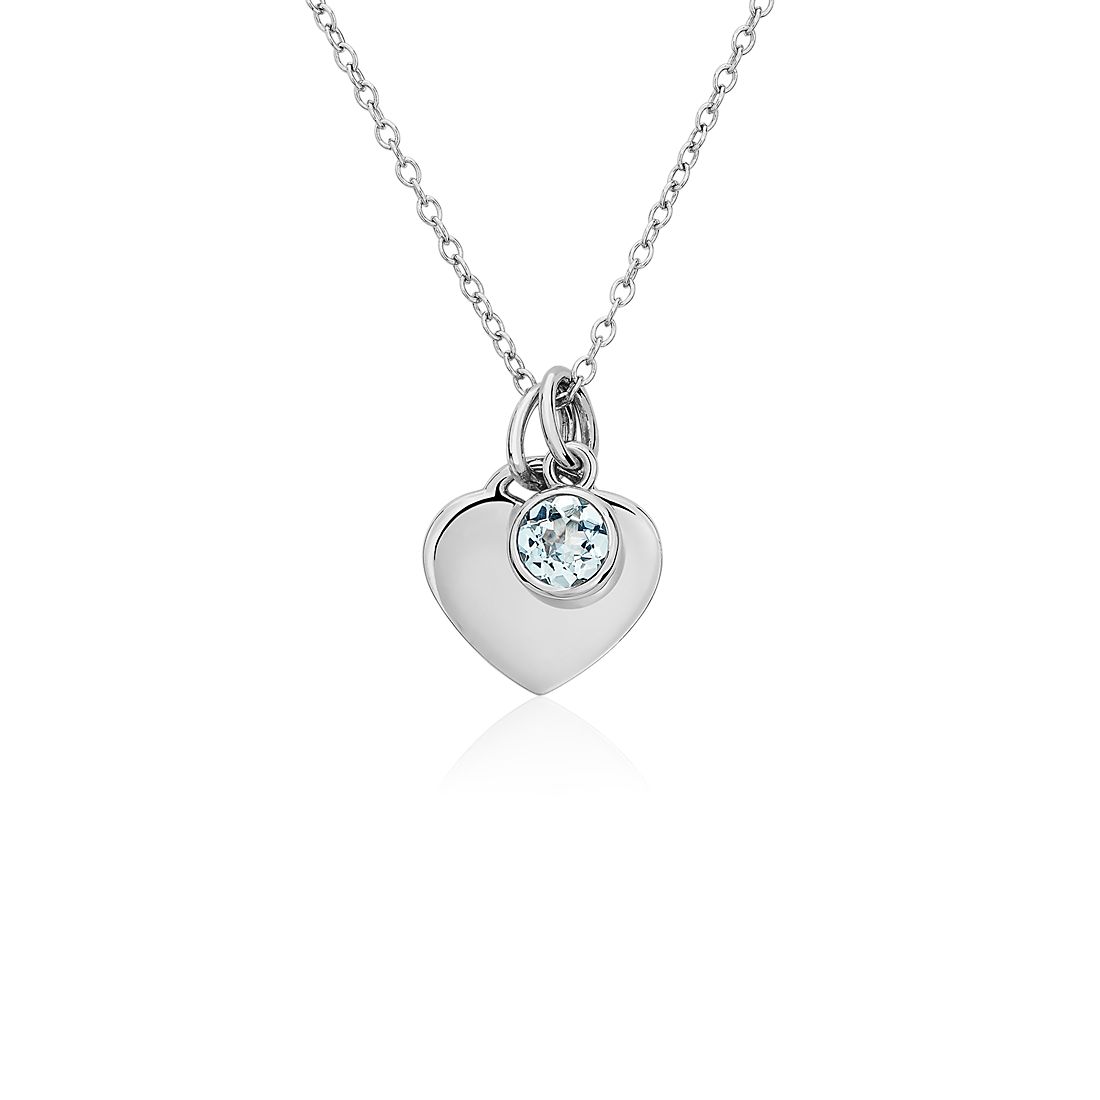 18-Inch Rhodium Plated Necklace with 6mm Zircon Birthstone Beads and Sterling Silver Our Lady of Good Help Charm. 